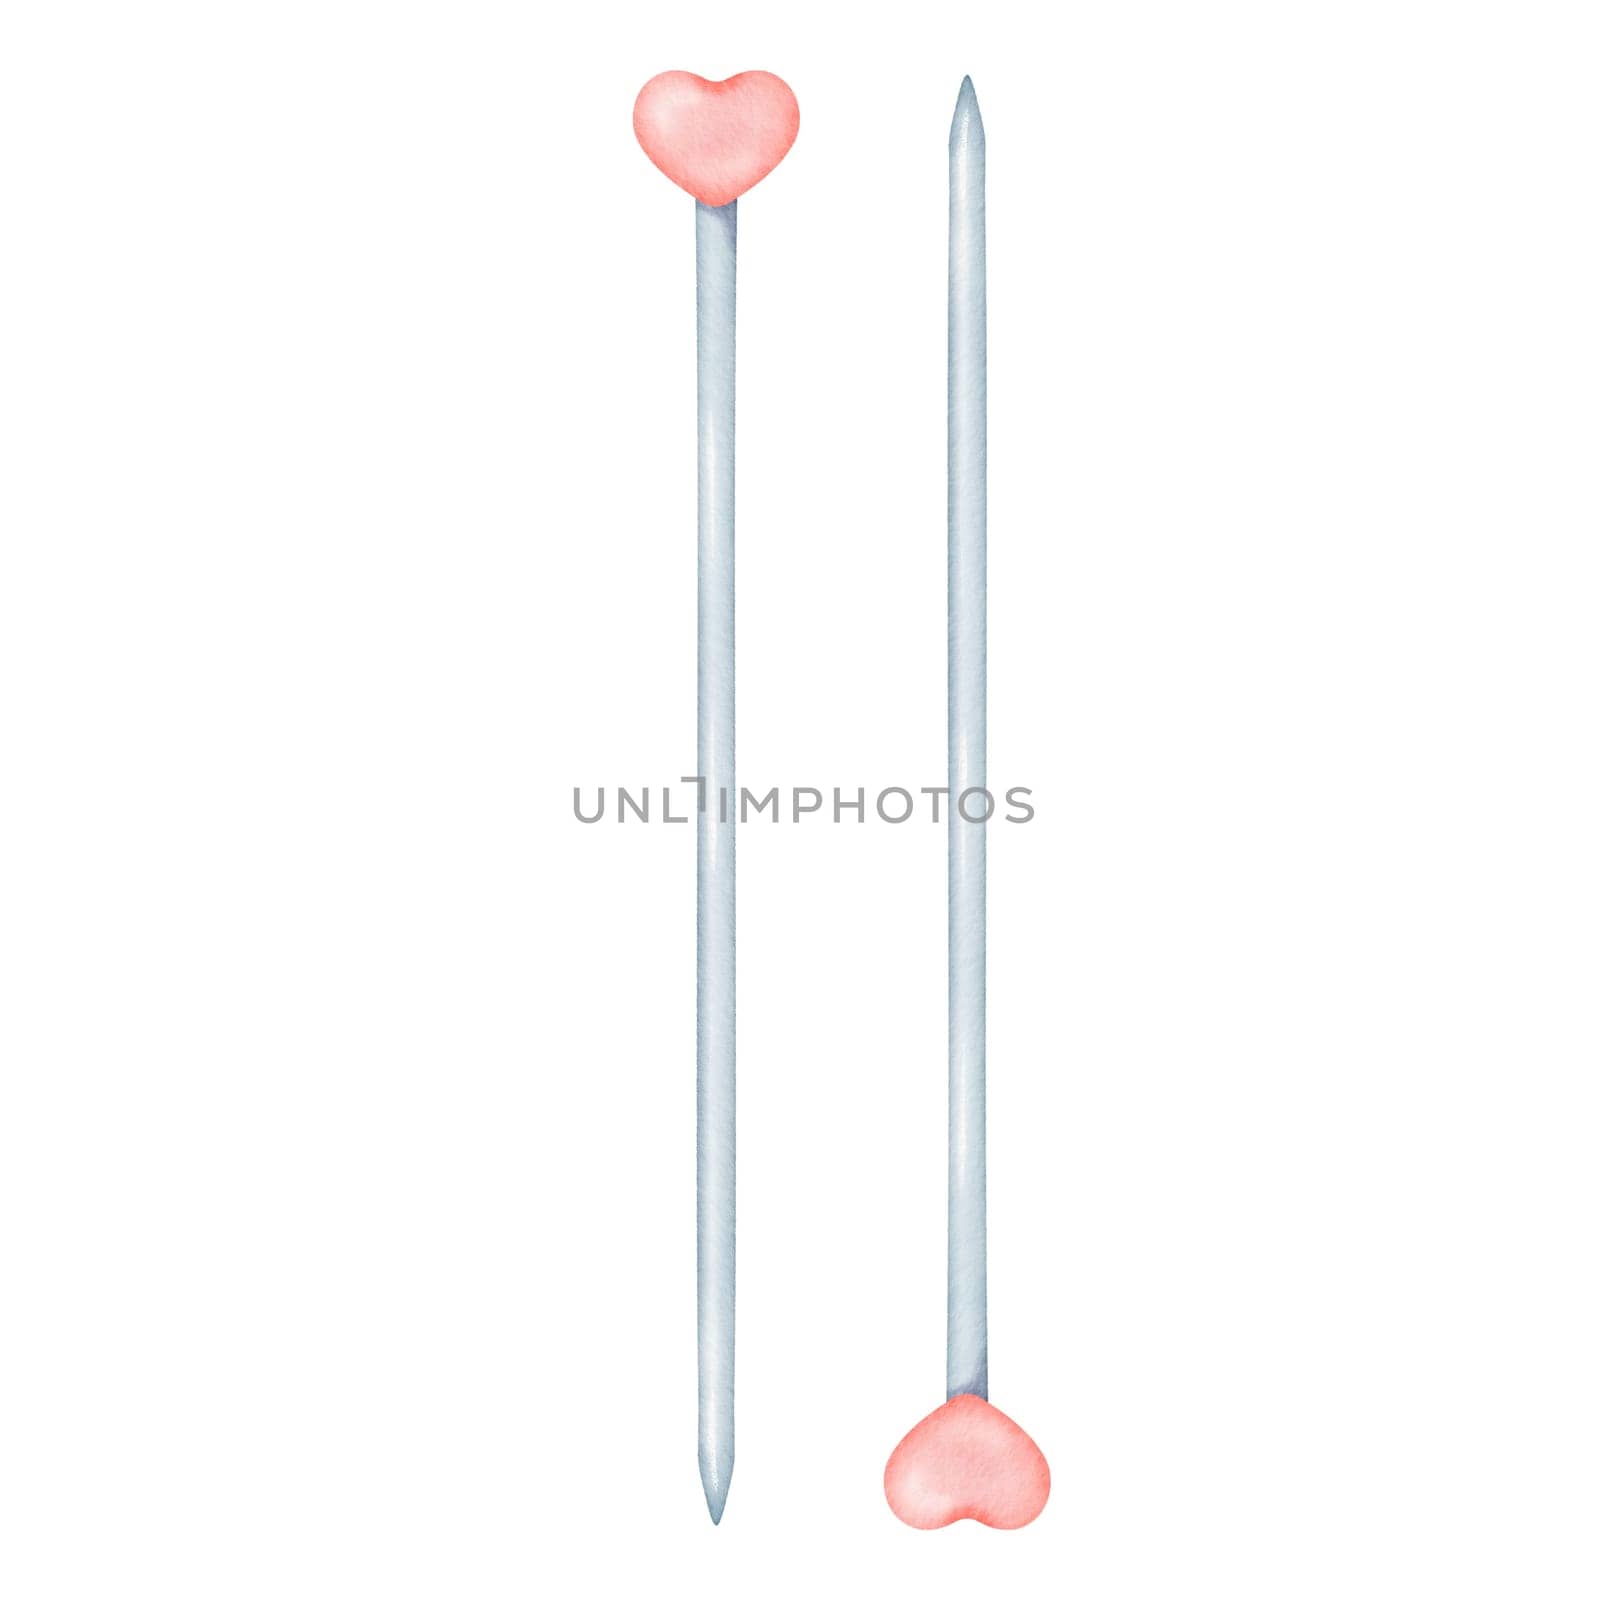 Metal knitting needles enhanced with charming plastic heart-shaped adornments. watercolor illustration. Ideal for crafting tutorials, knitting enthusiasts' blogs, or DIY-themed designs by Art_Mari_Ka